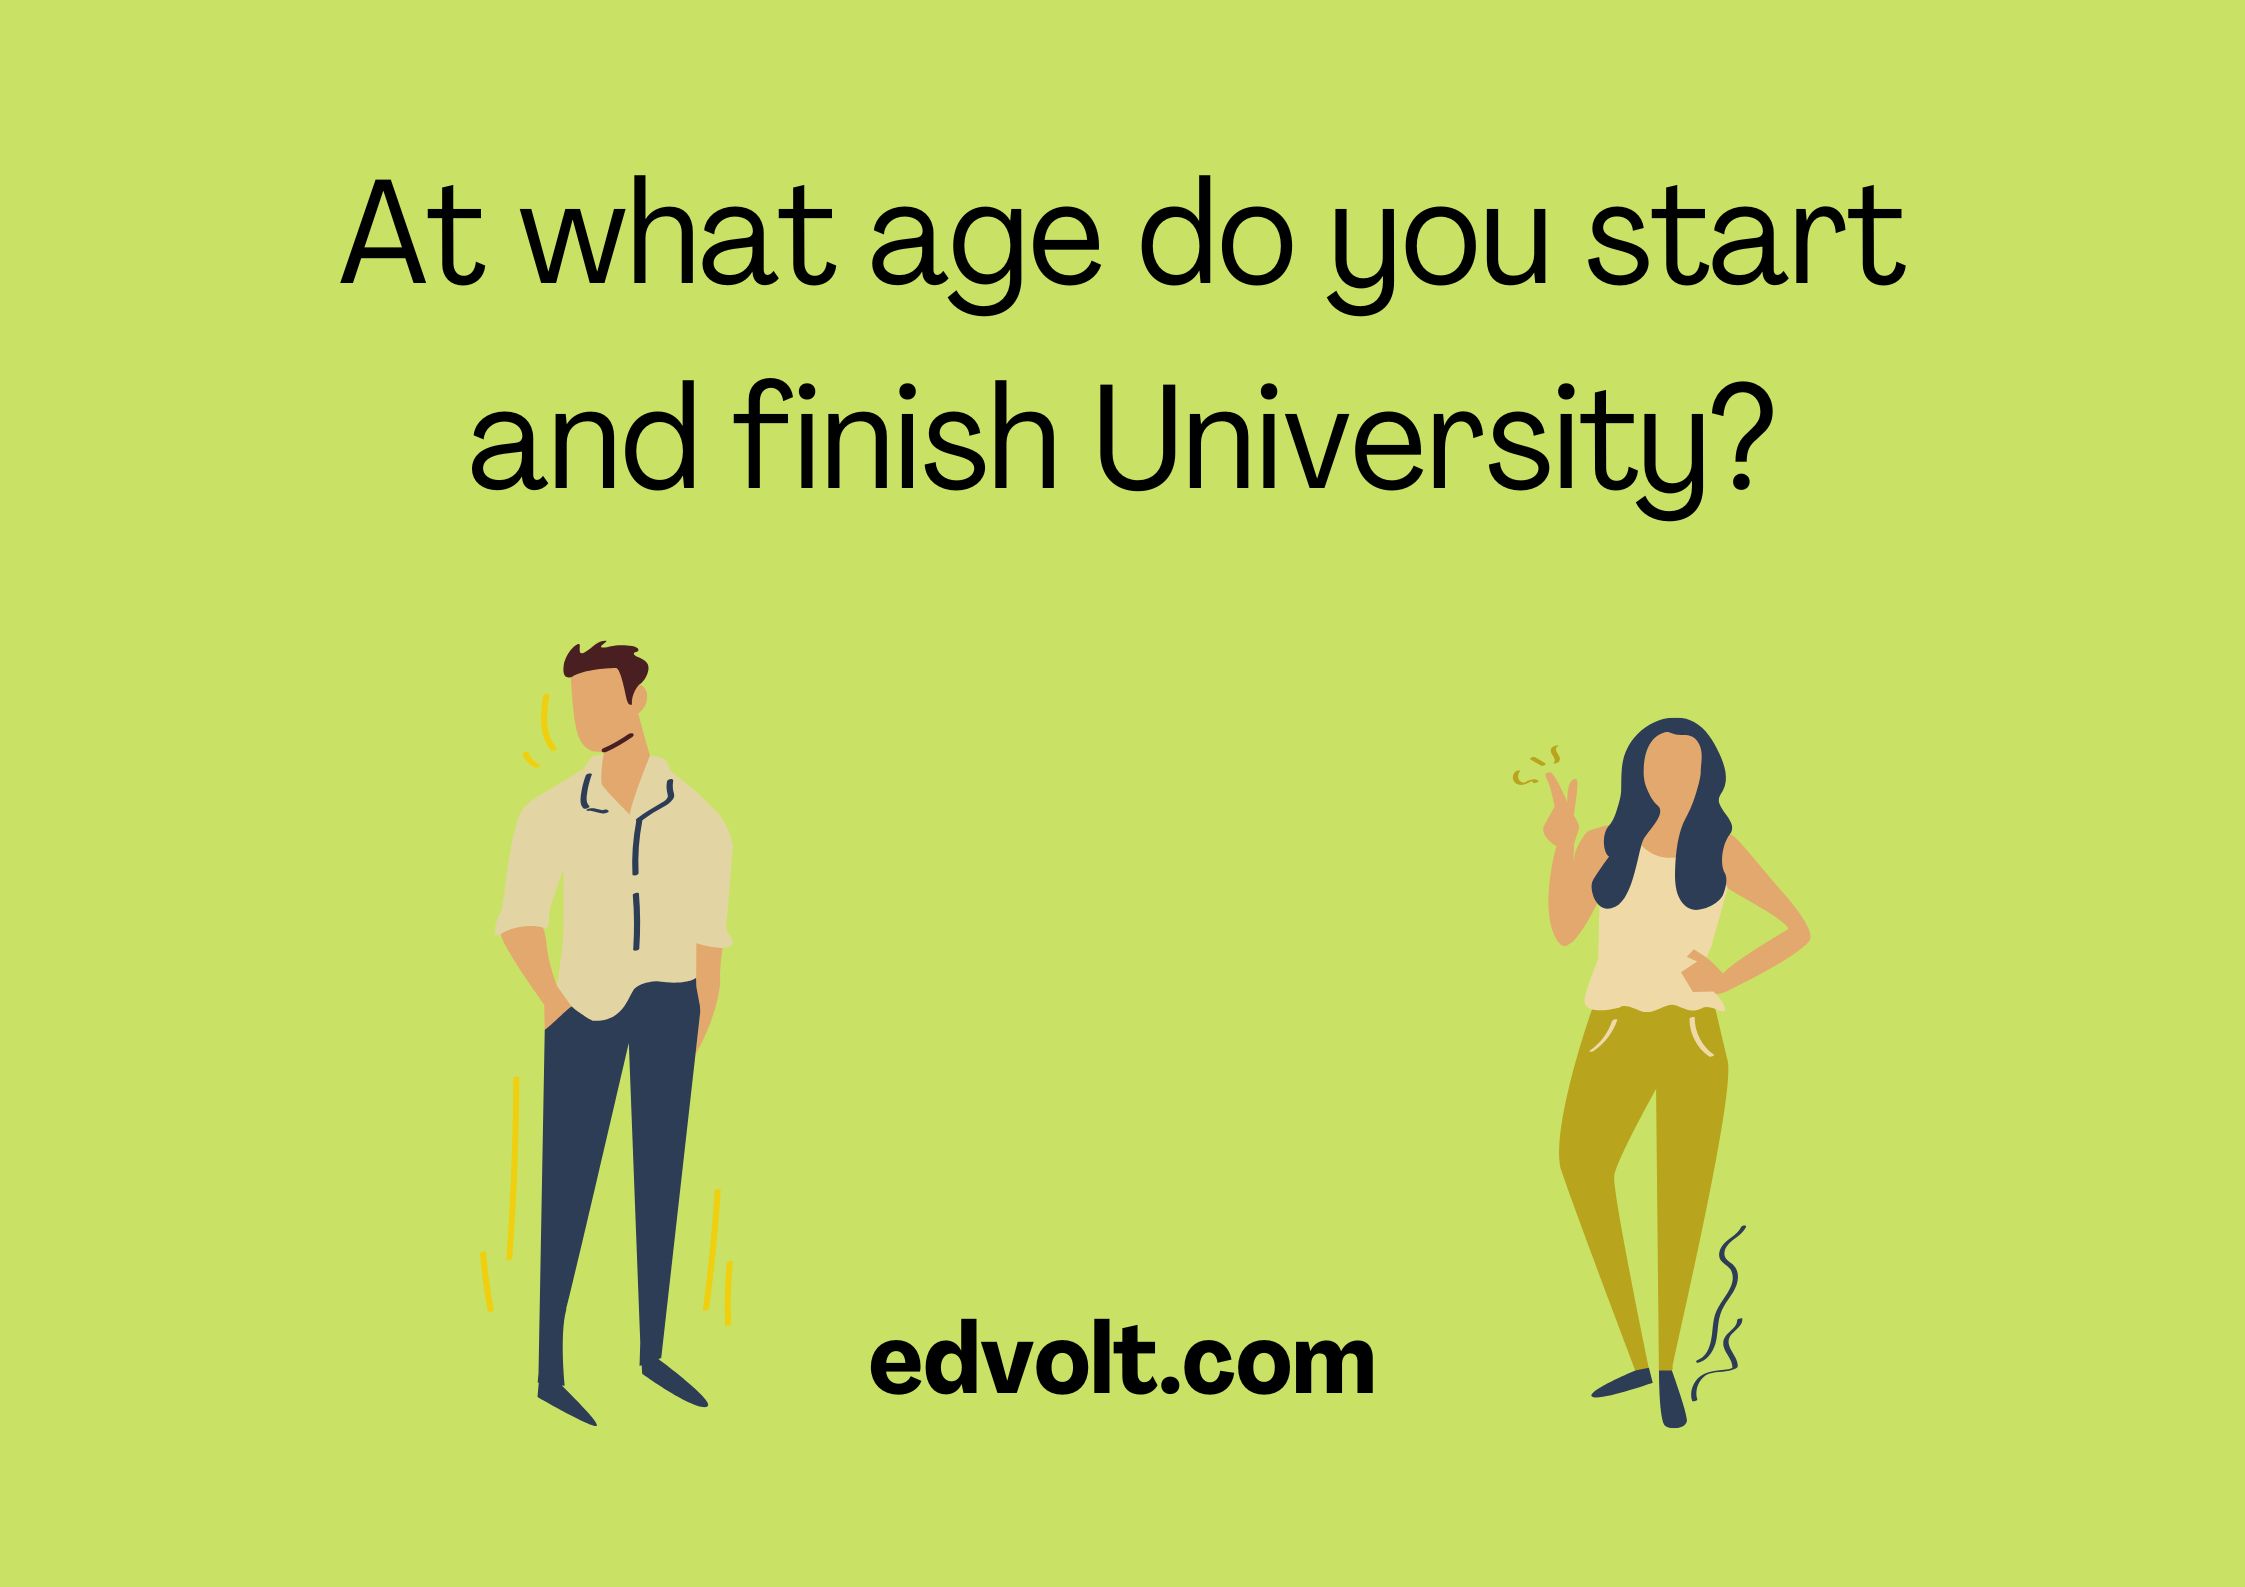 At what age do you start and finish University?